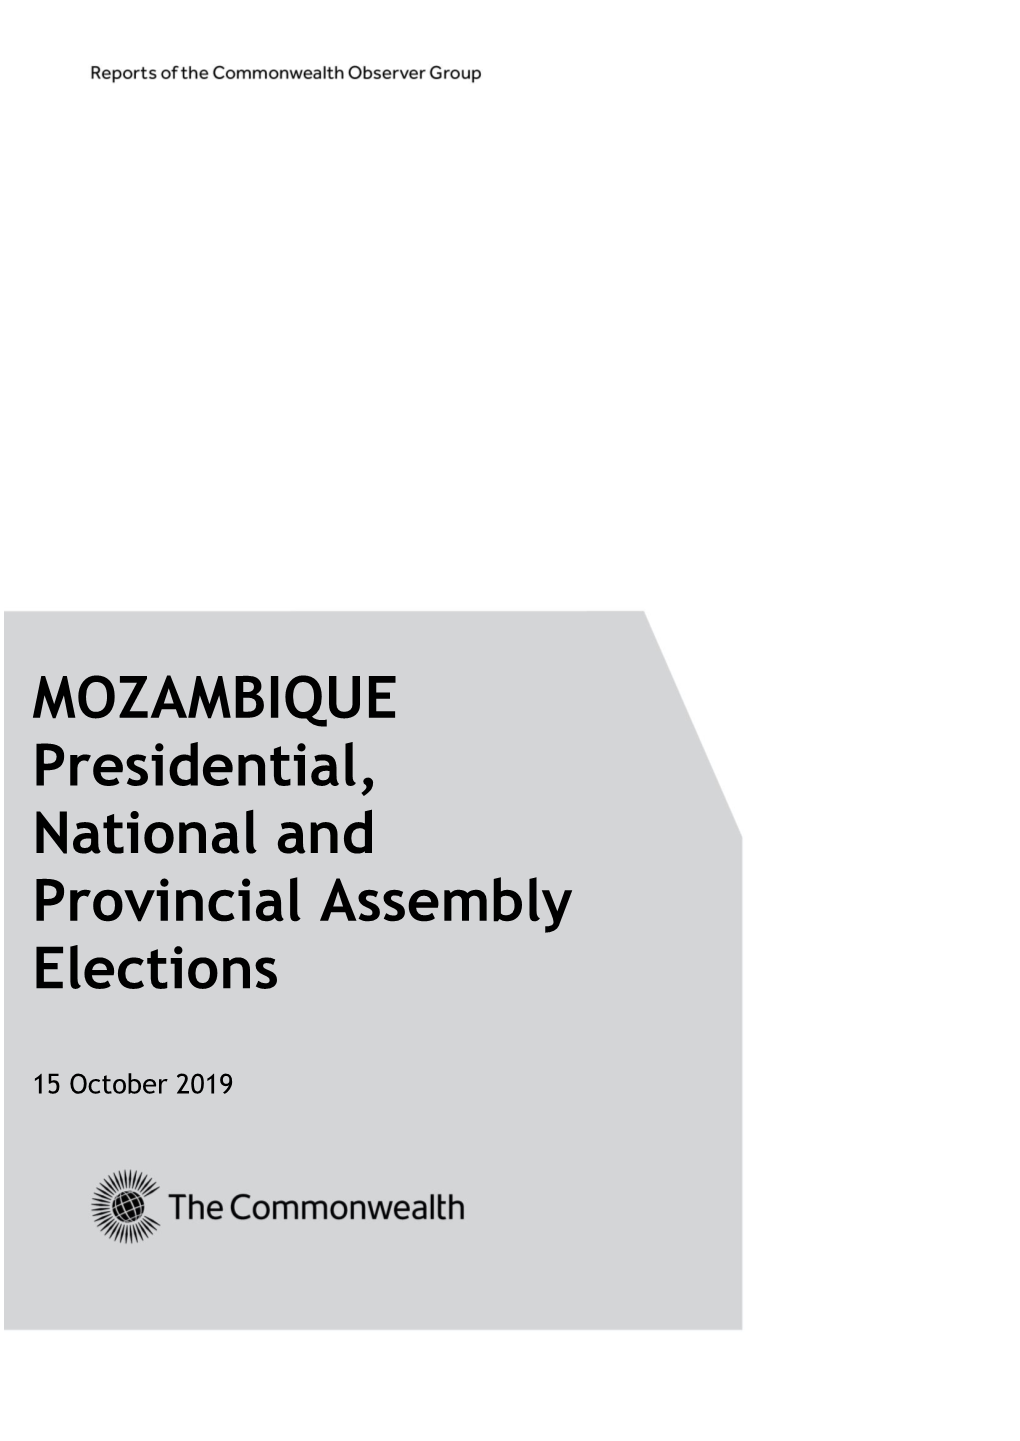 MOZAMBIQUE Presidential, National and Provincial Assembly Elections